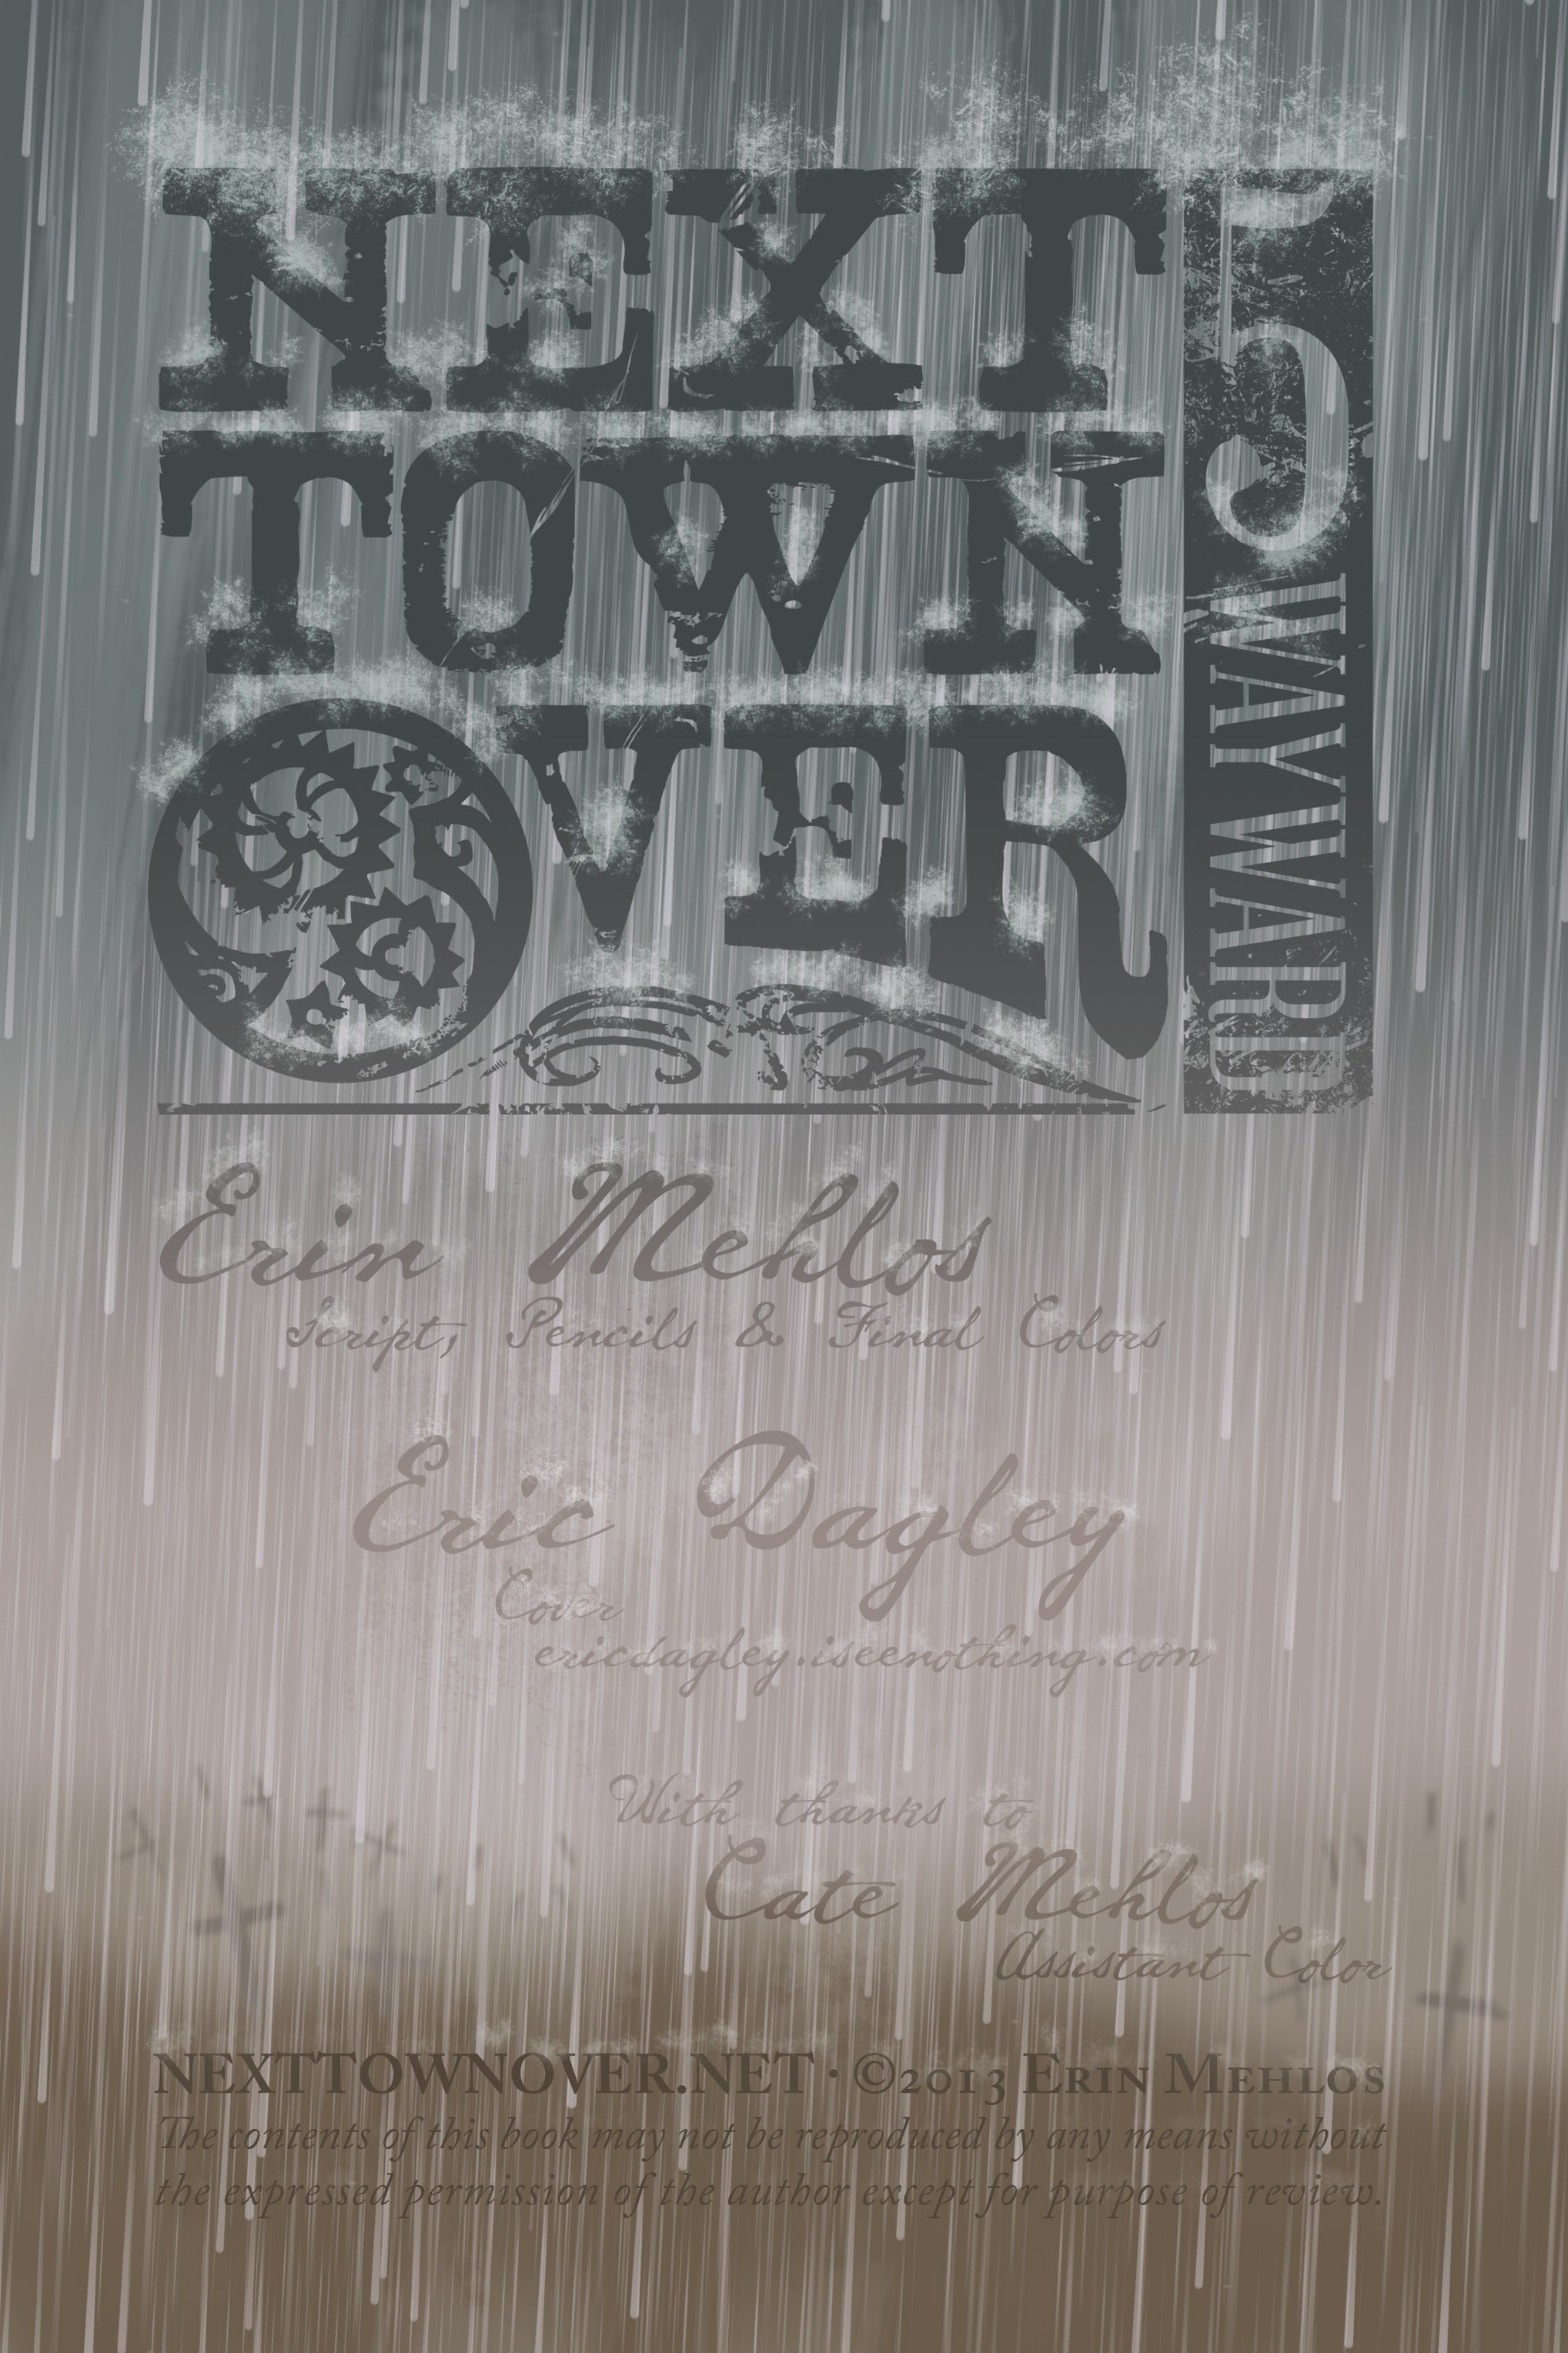 Read online Next Town Over comic -  Issue #5 - 2